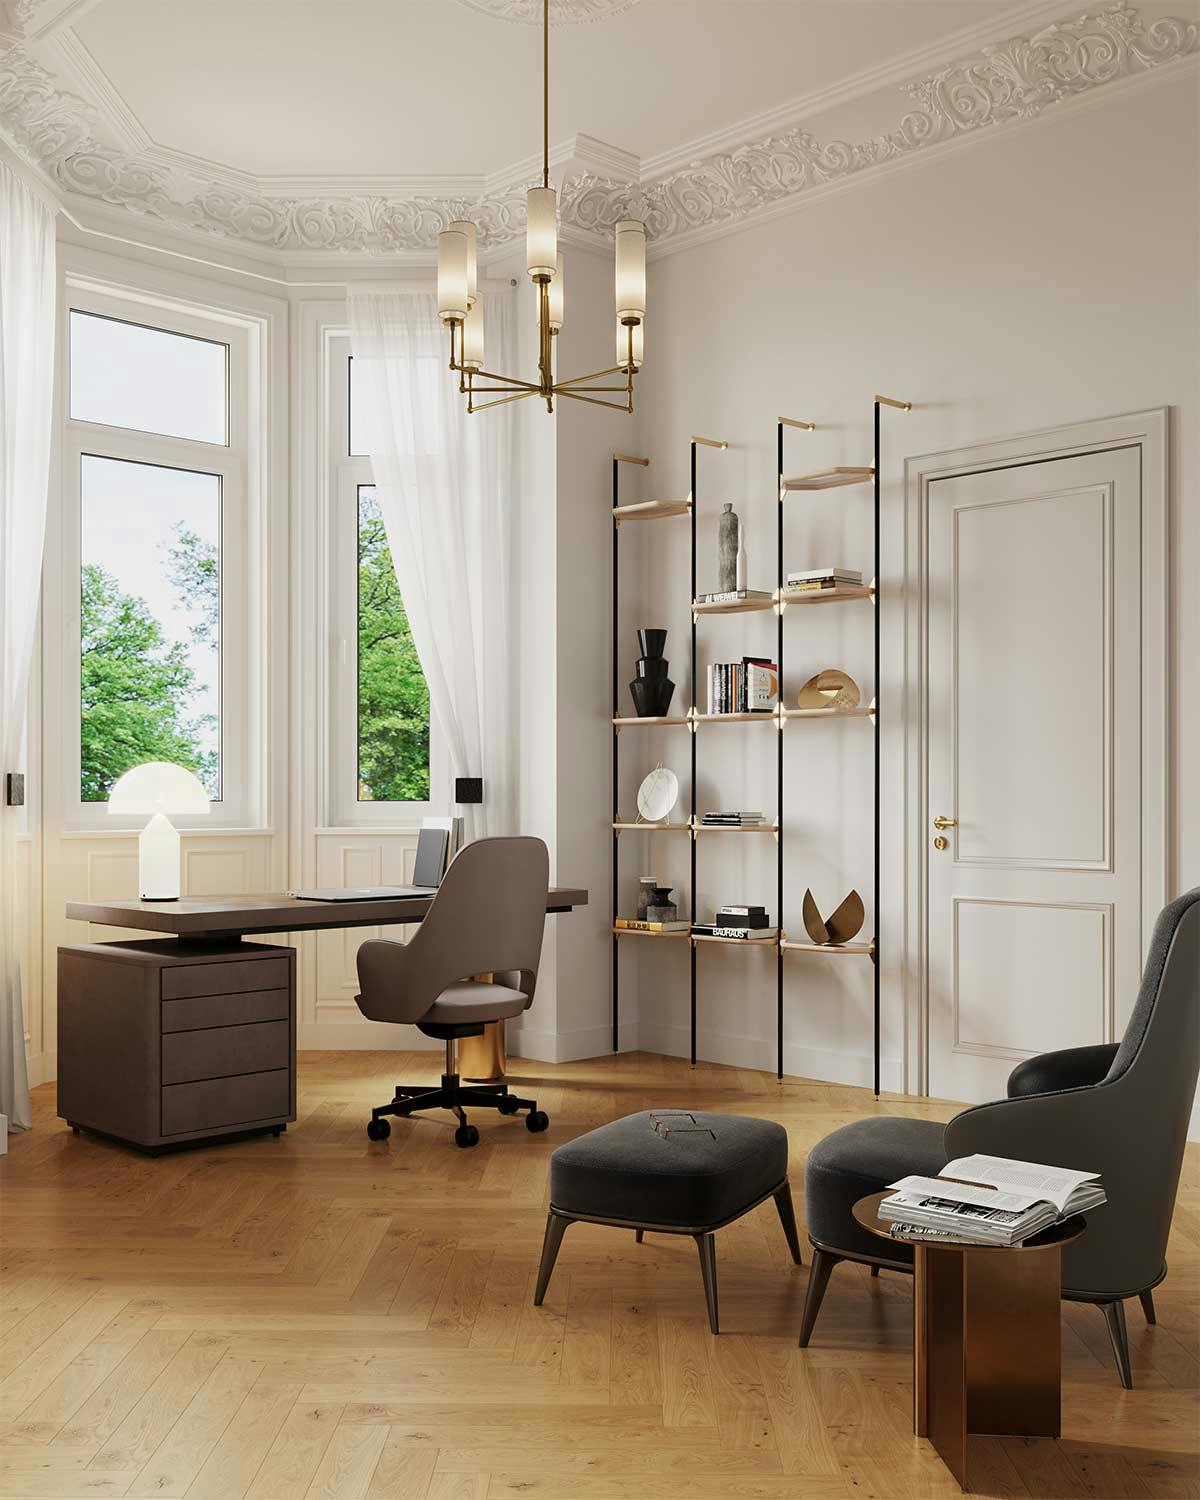 3D Interior Visualization with the design concept of an office room in a historic apartment in Hamburg.